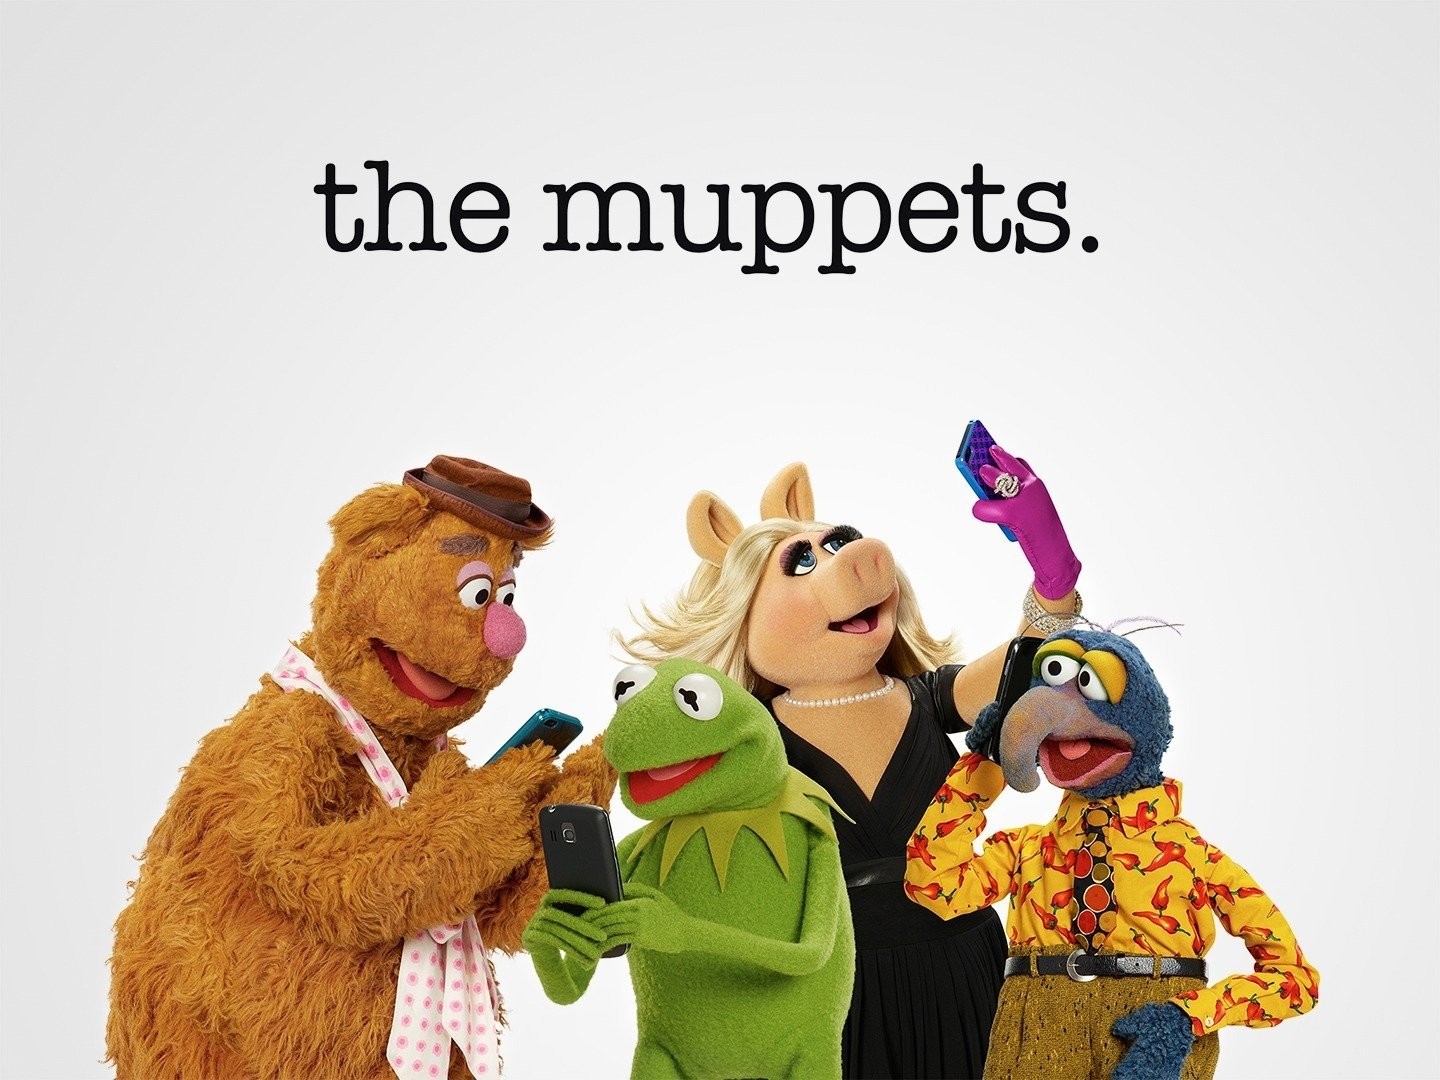 The 15 best moments from the original 'Muppet Show